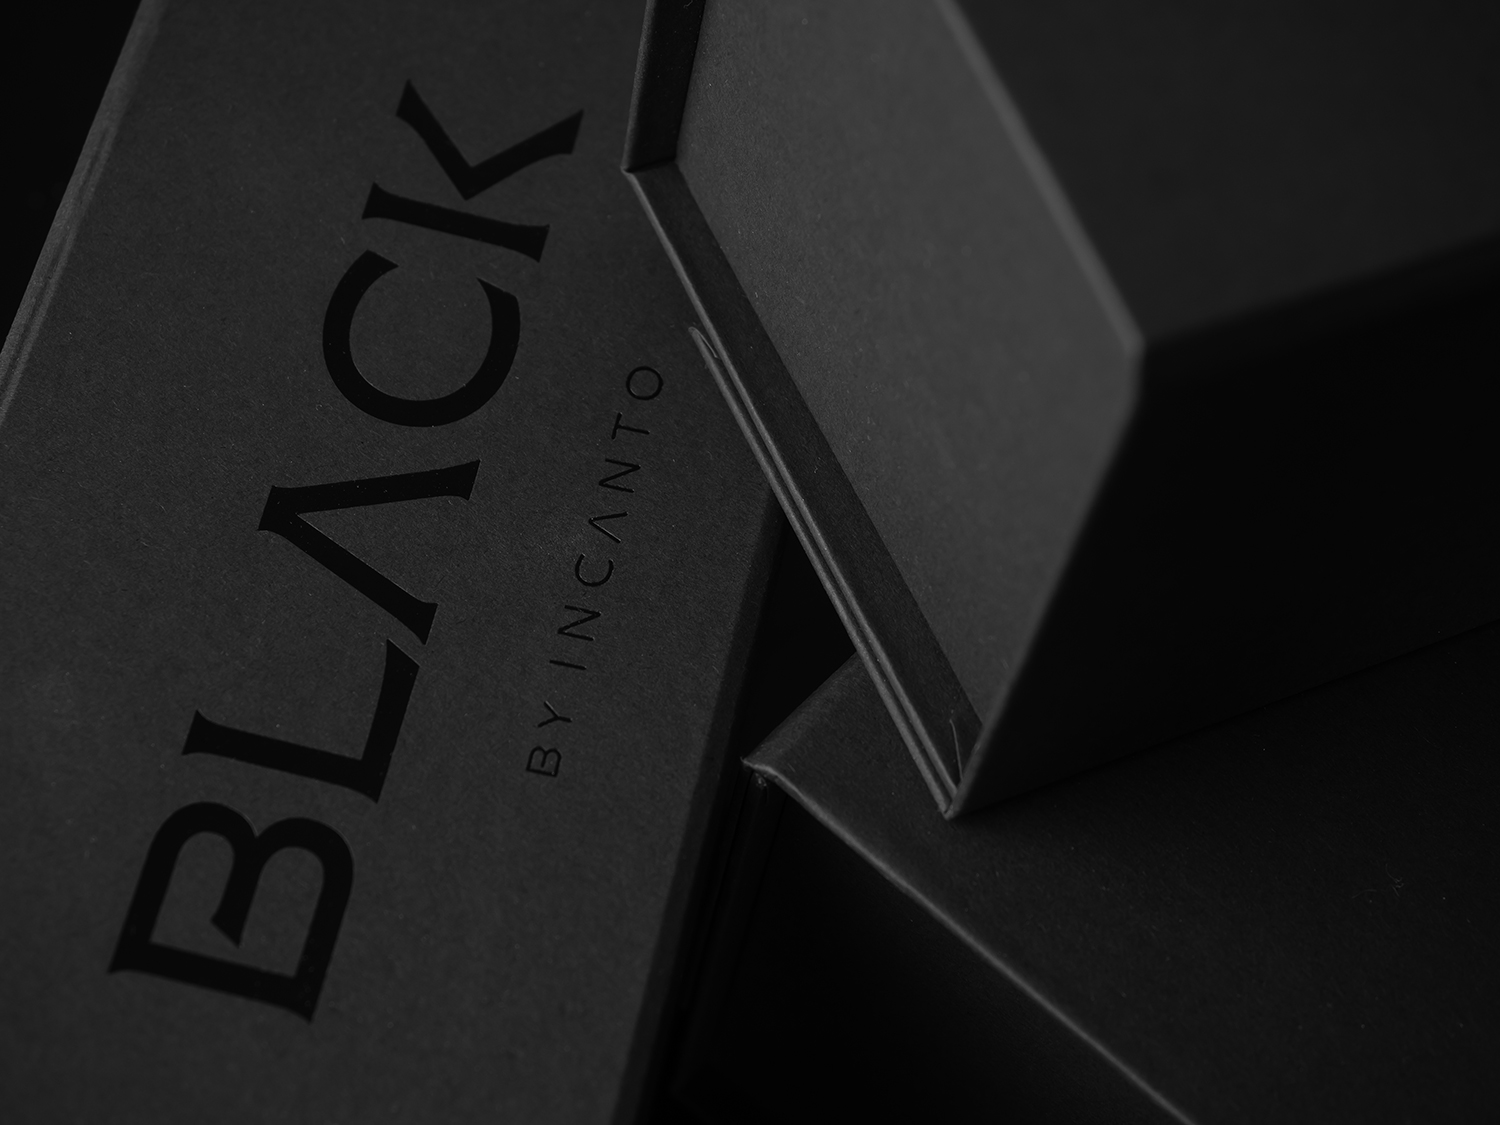 The Incanto Black Branding & Packaging Shows The Enchanting Power of Wine